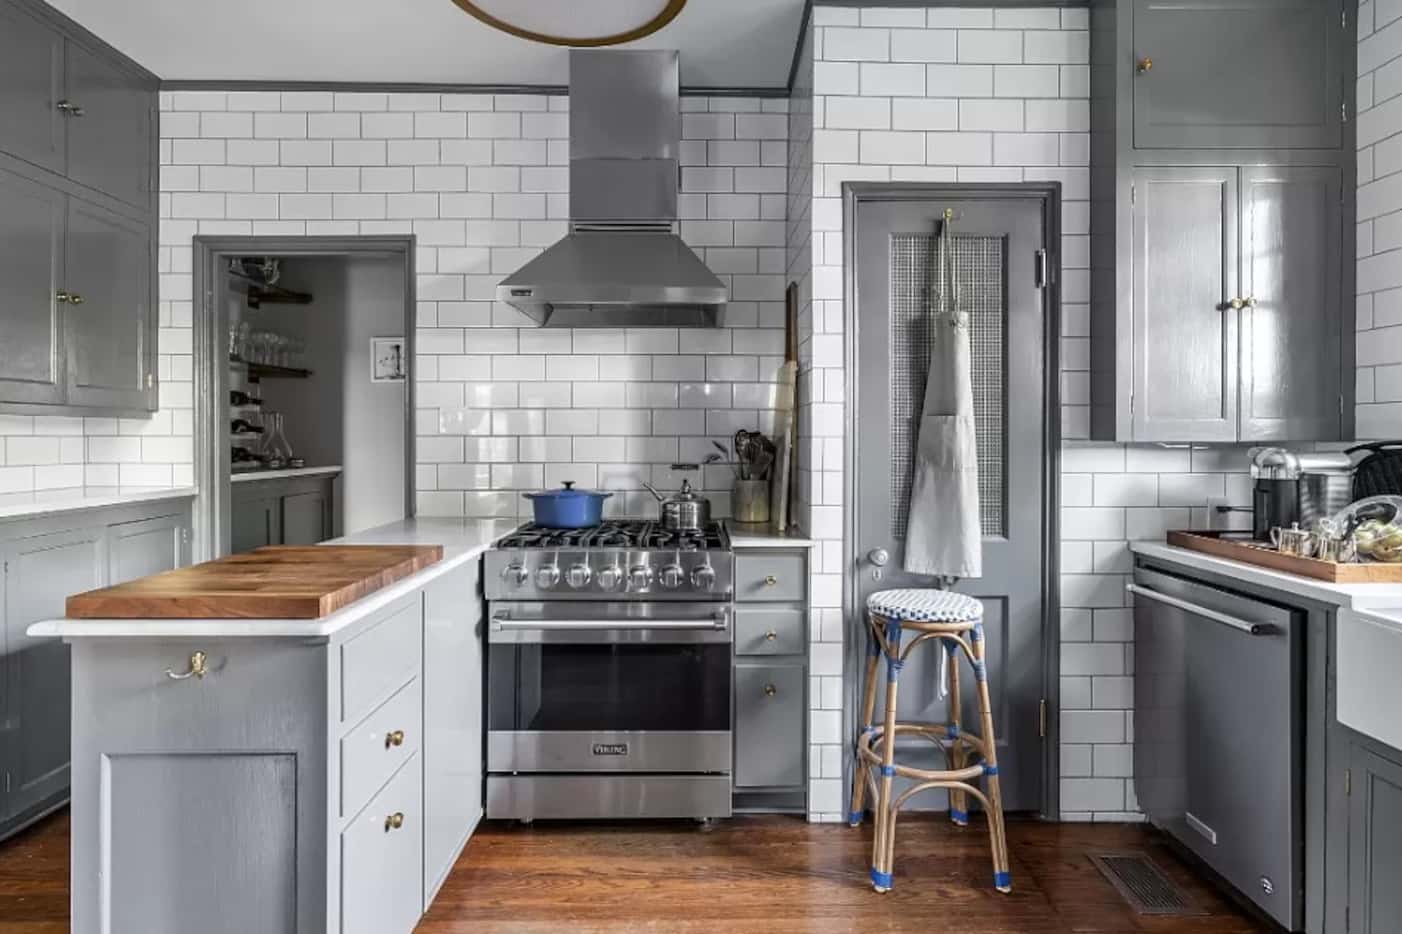 Kitchen with white subway tile, gray cabinetry and stainless appliances